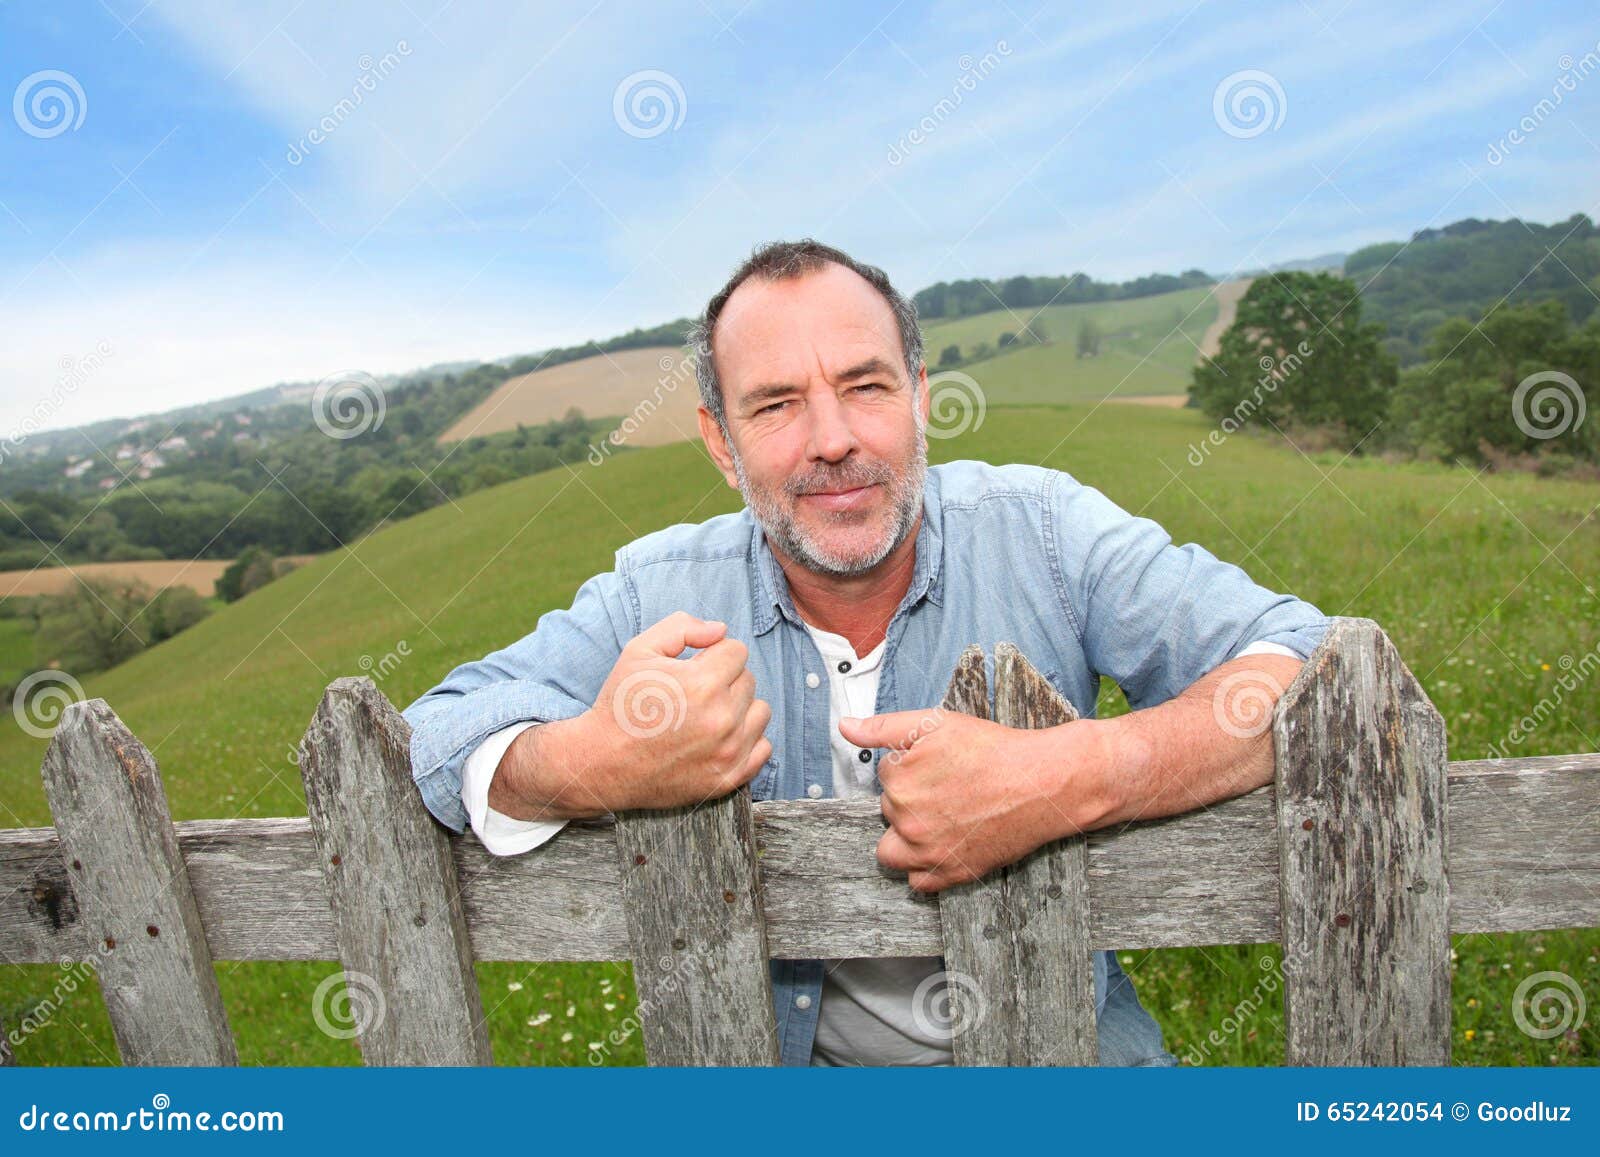 smiling farmer by the fence